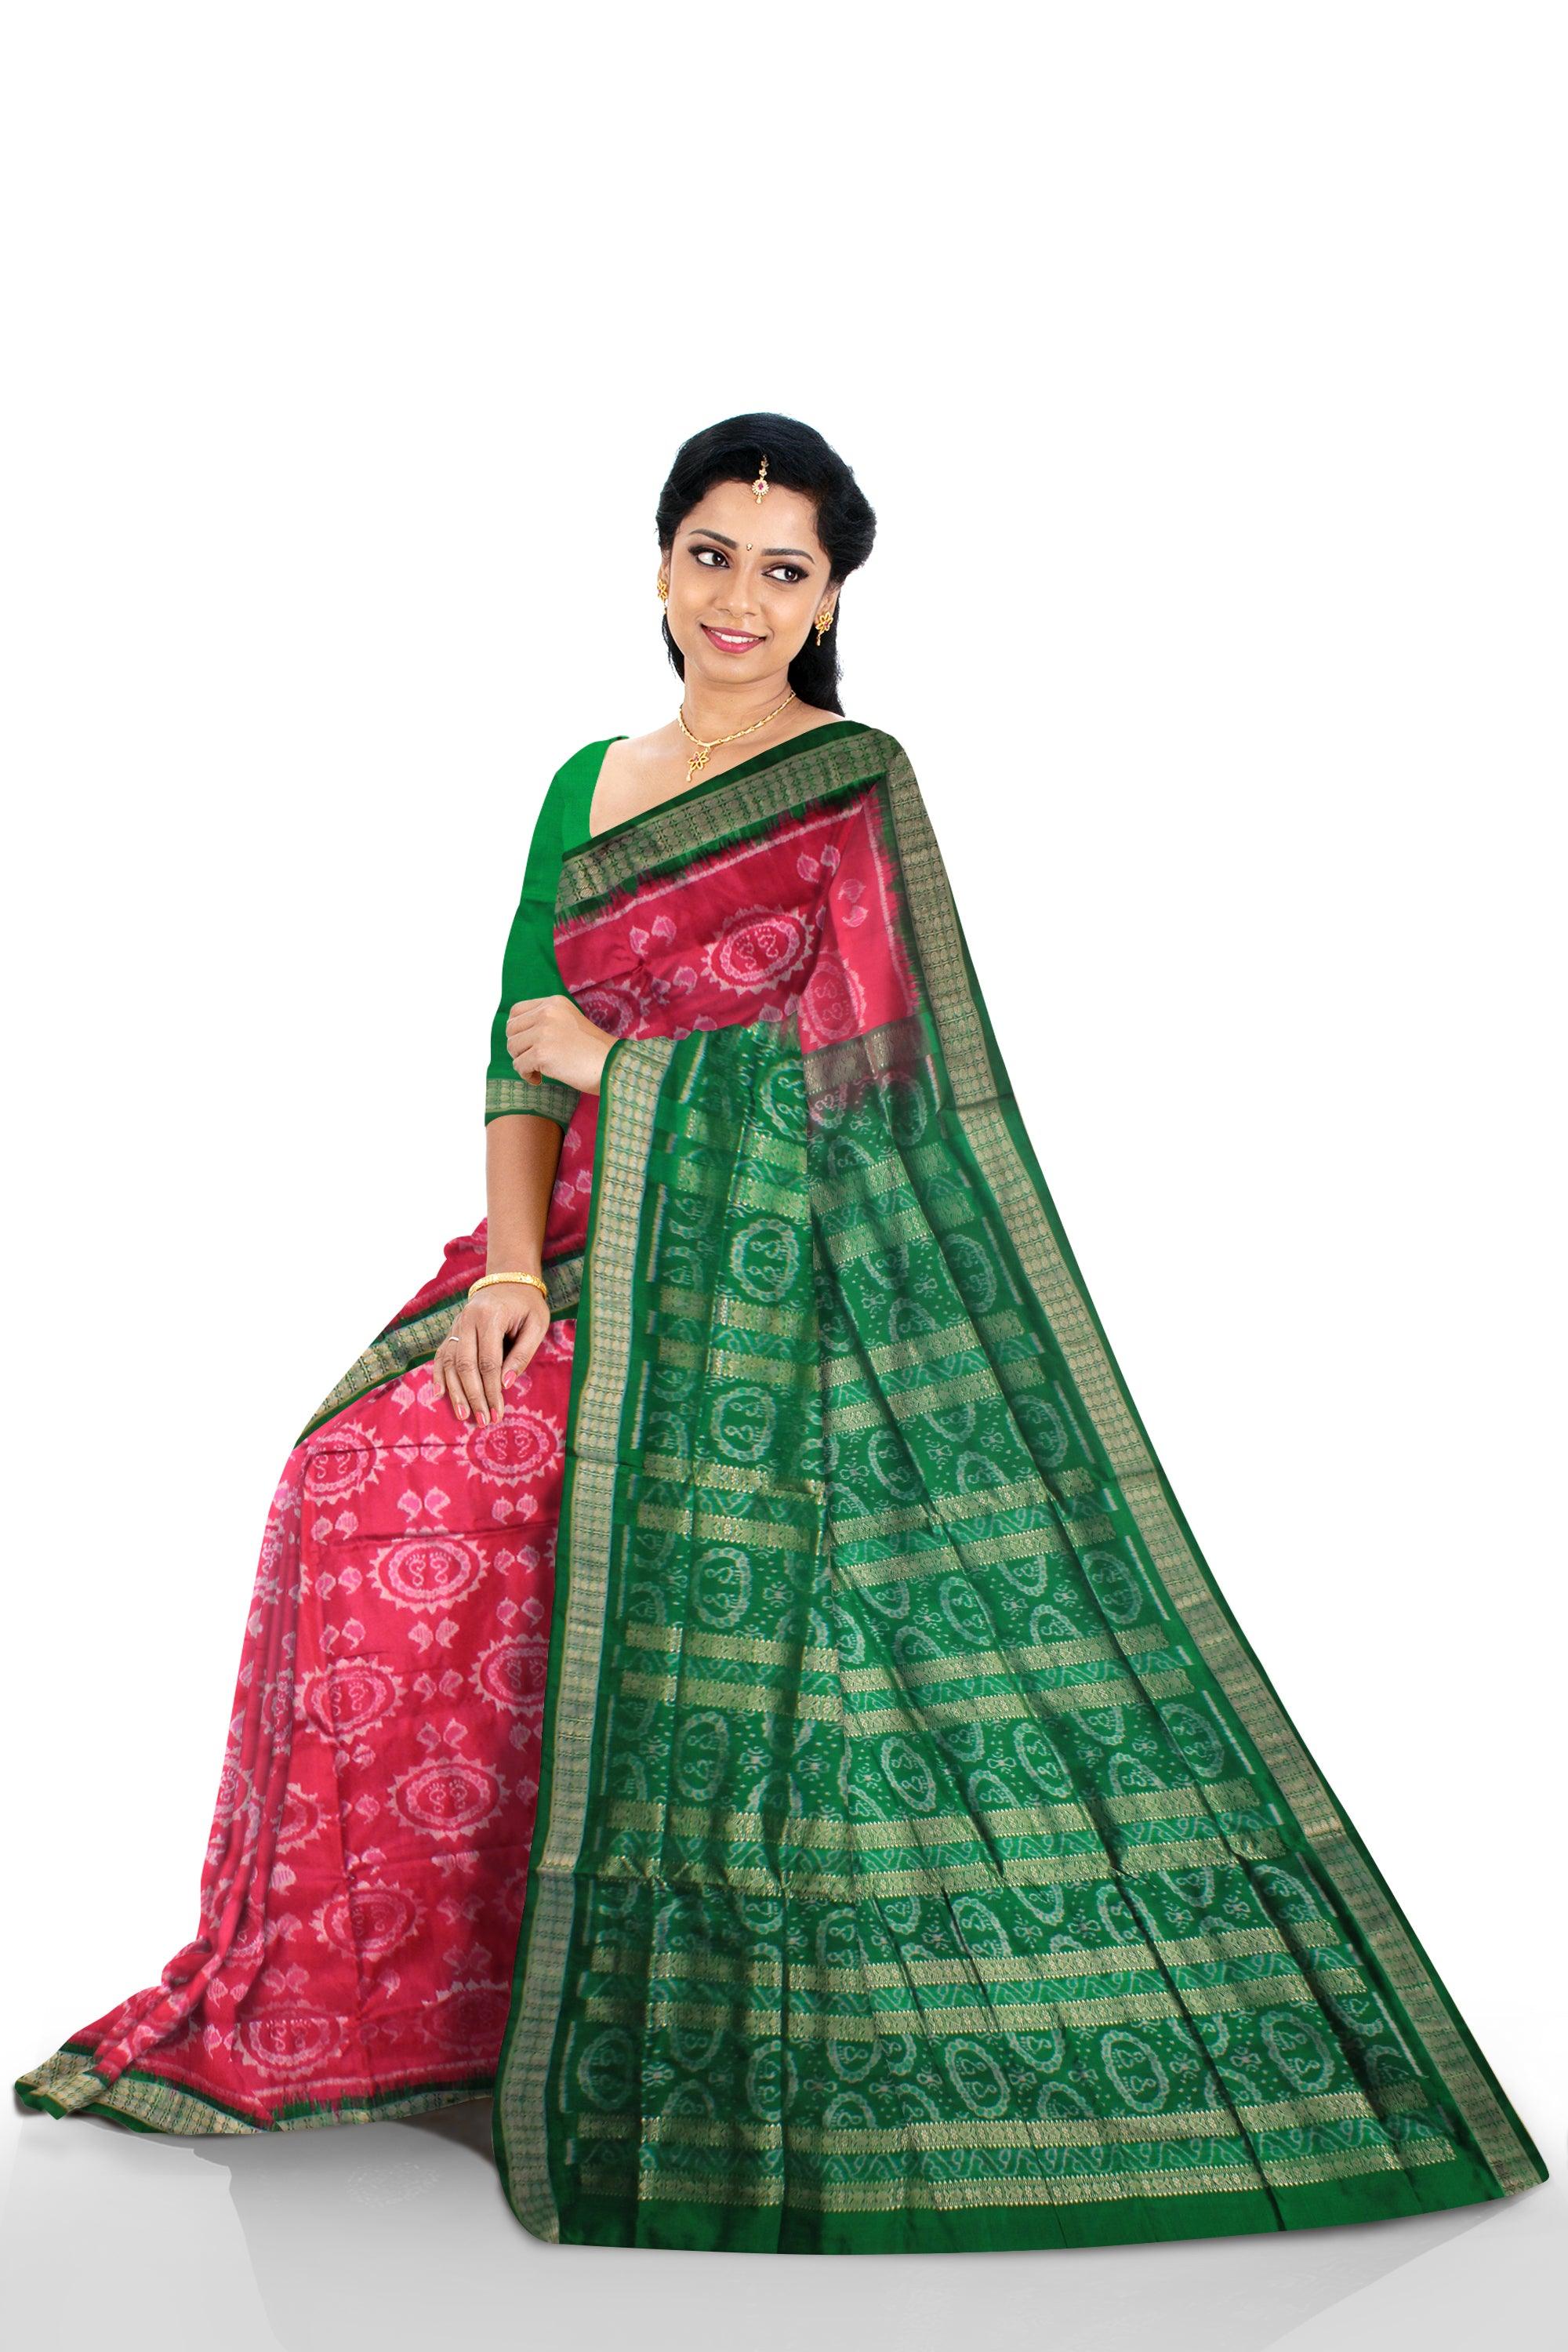 ROSE AND GREEN COLOR SONEPUR TRADITIONAL LAXMI DESIGNS PURE SILK SAREE, COMES WITH BLOUSE PIECE. - Koshali Arts & Crafts Enterprise